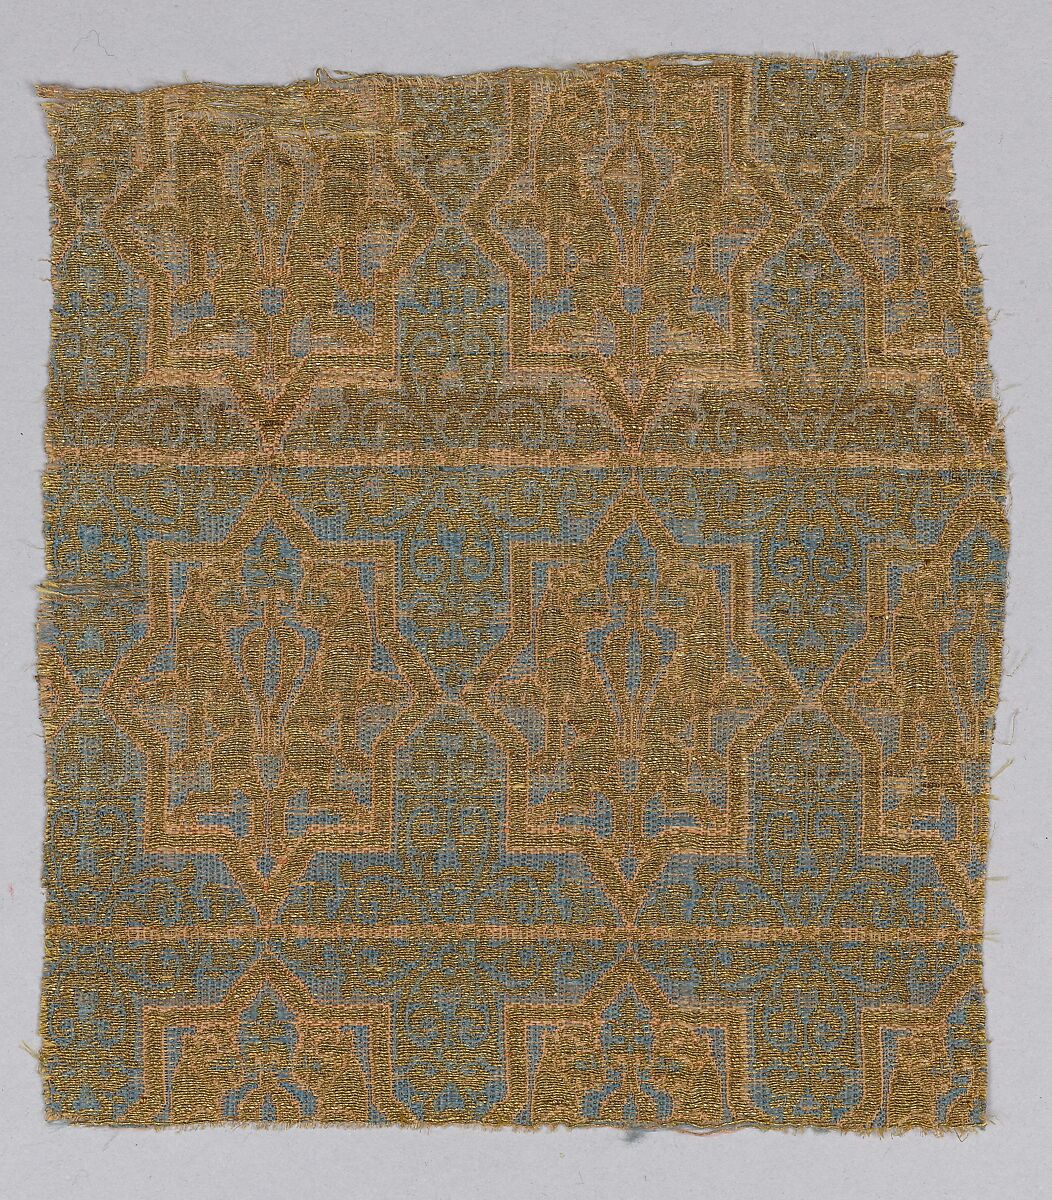 Textile Fragment from the Chasuble of San Valerius, Silk, gilt animal substrate around a silk core; taqueté 